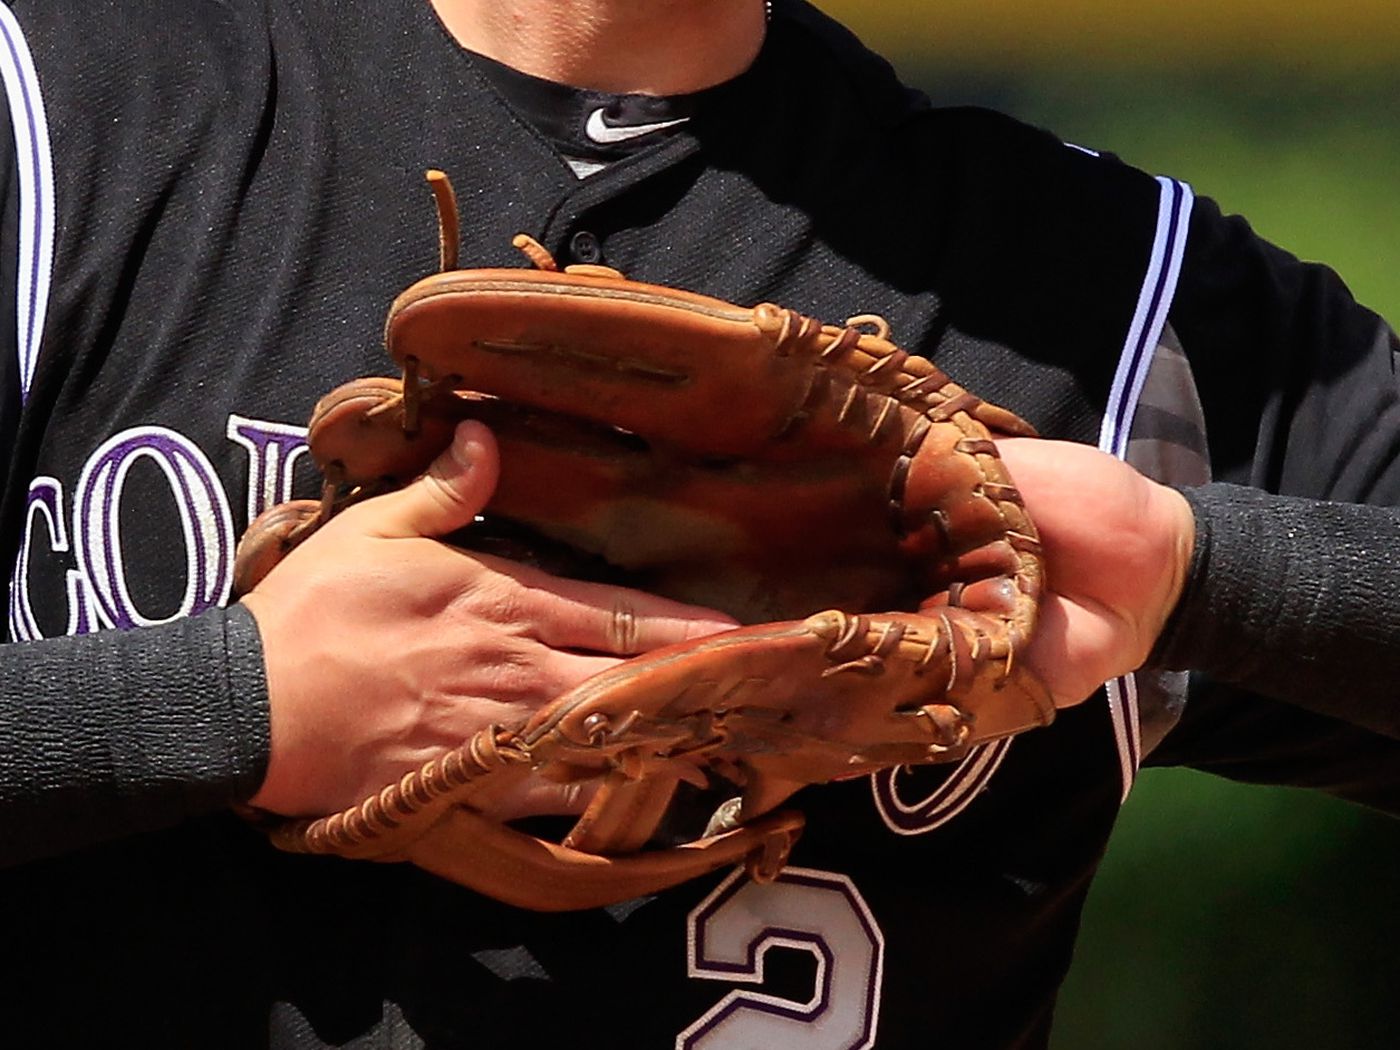 Troy Tulowitzki's glove sure has gone through a lot over the last